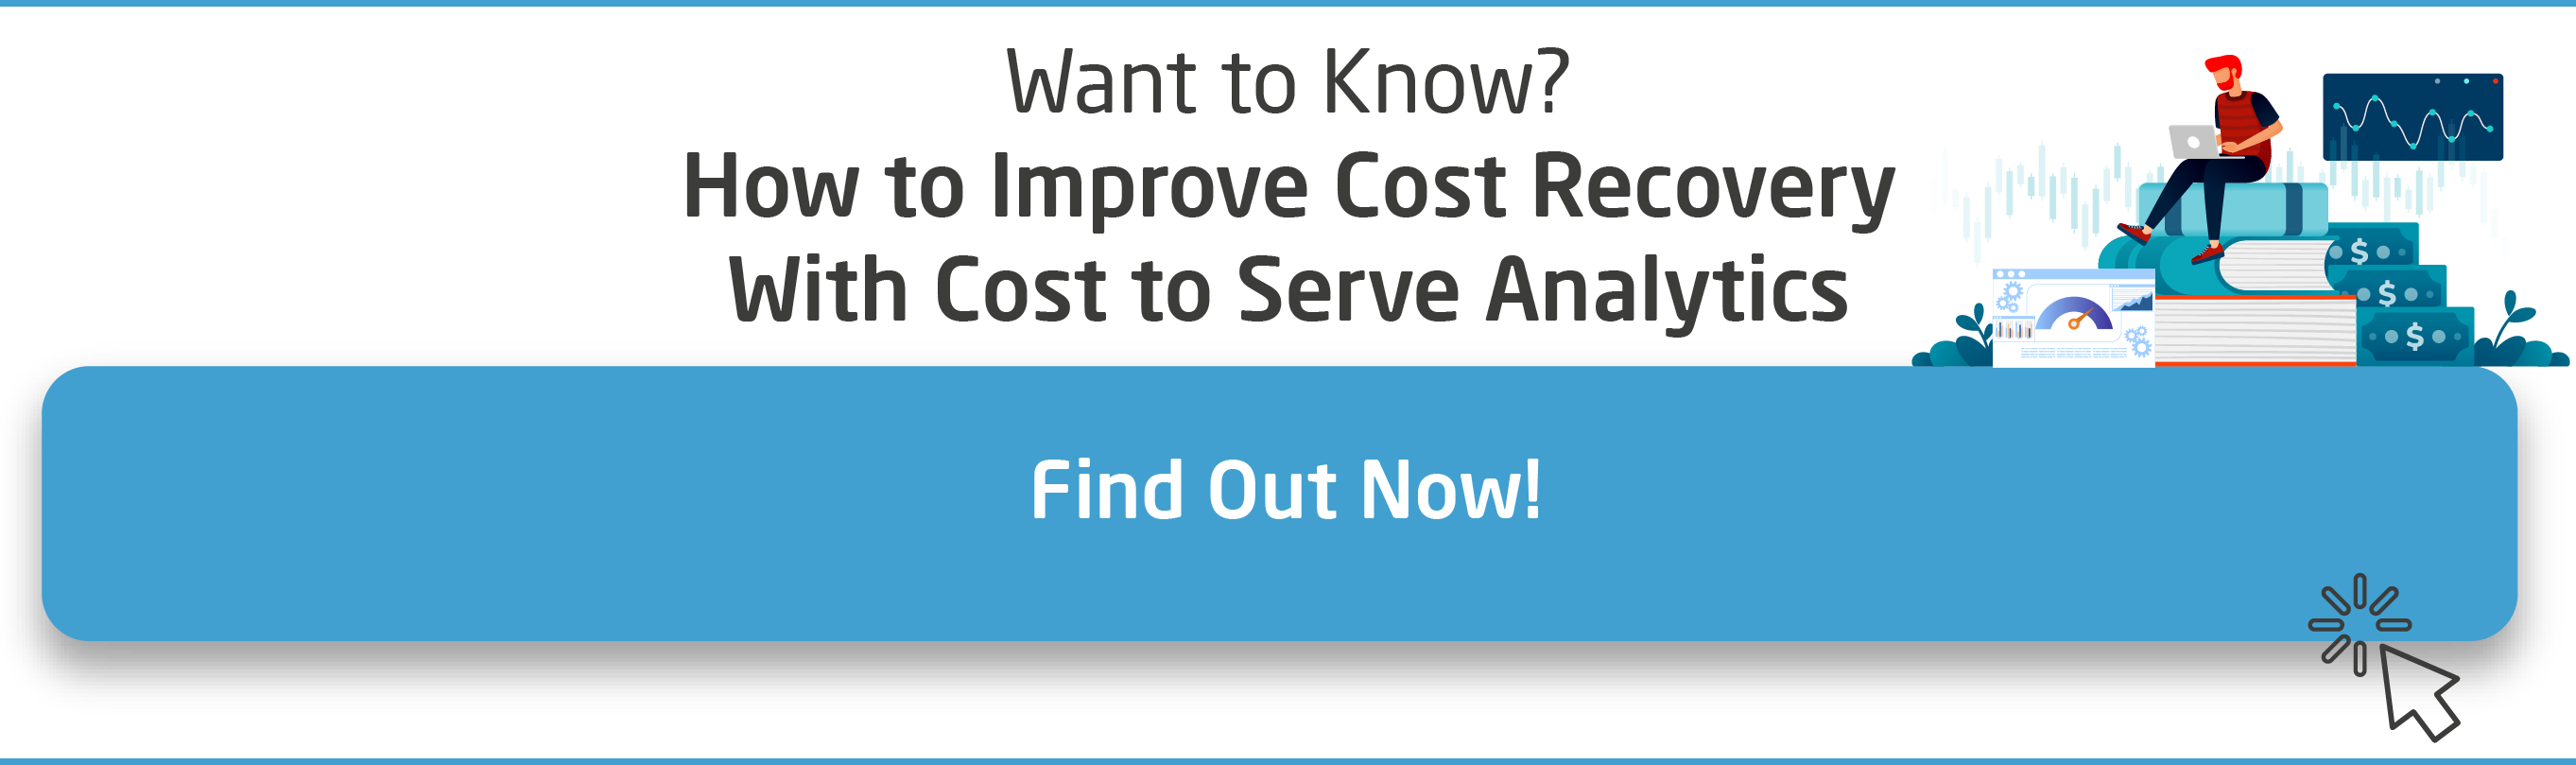 CTA_InArticle_How-to-Improve-Cost-Recovery-With-Cost-to-Serve-Analysis